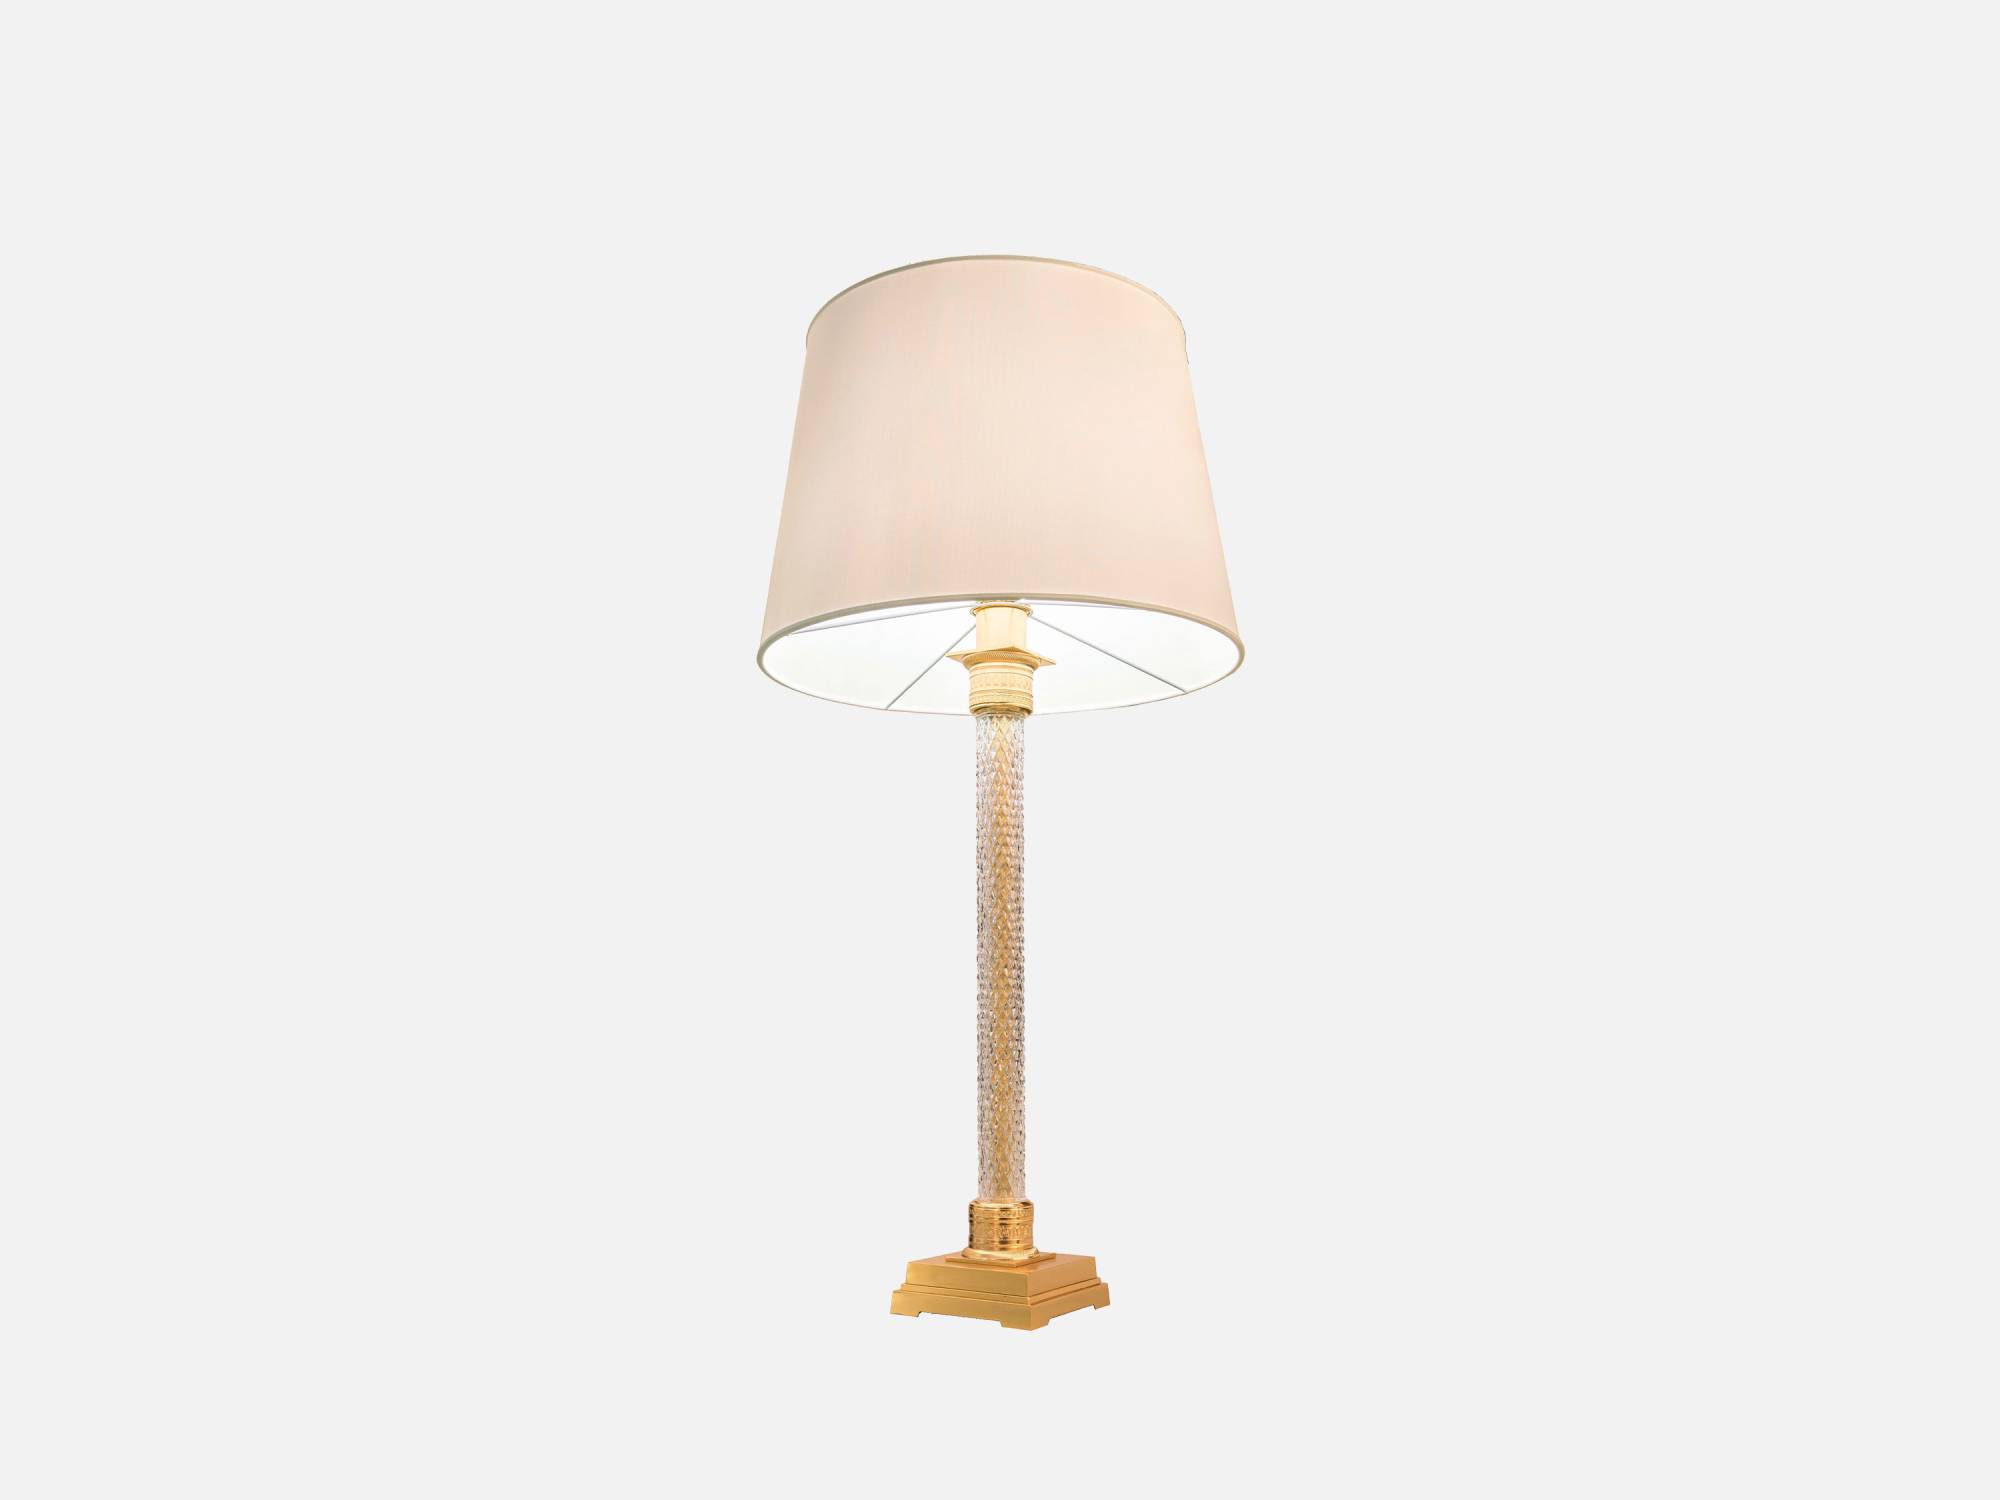 ART. 2216-22 - C.G. Capelletti quality furniture with made in Italy contemporary Lighting